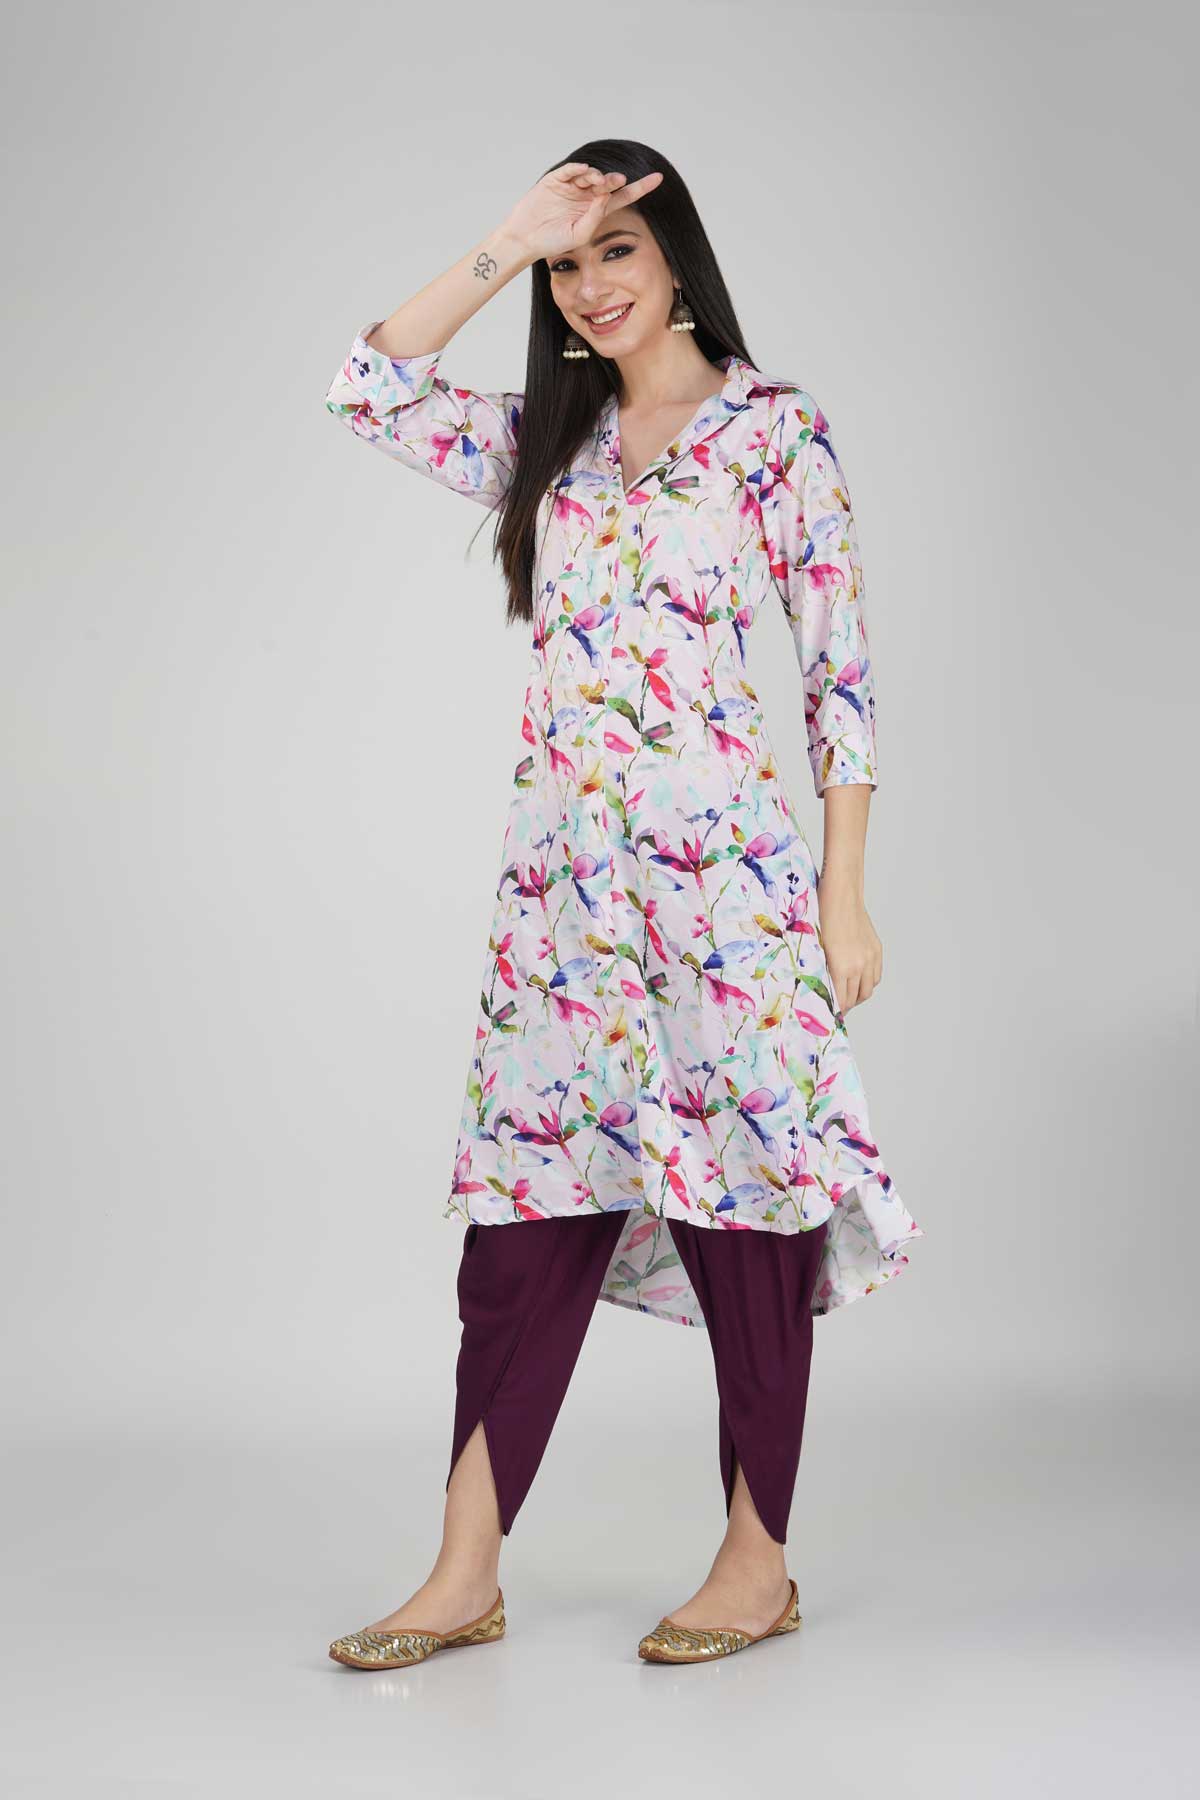 Buy Kurta with Dhoti Style Pant Online for Women at Best Prices